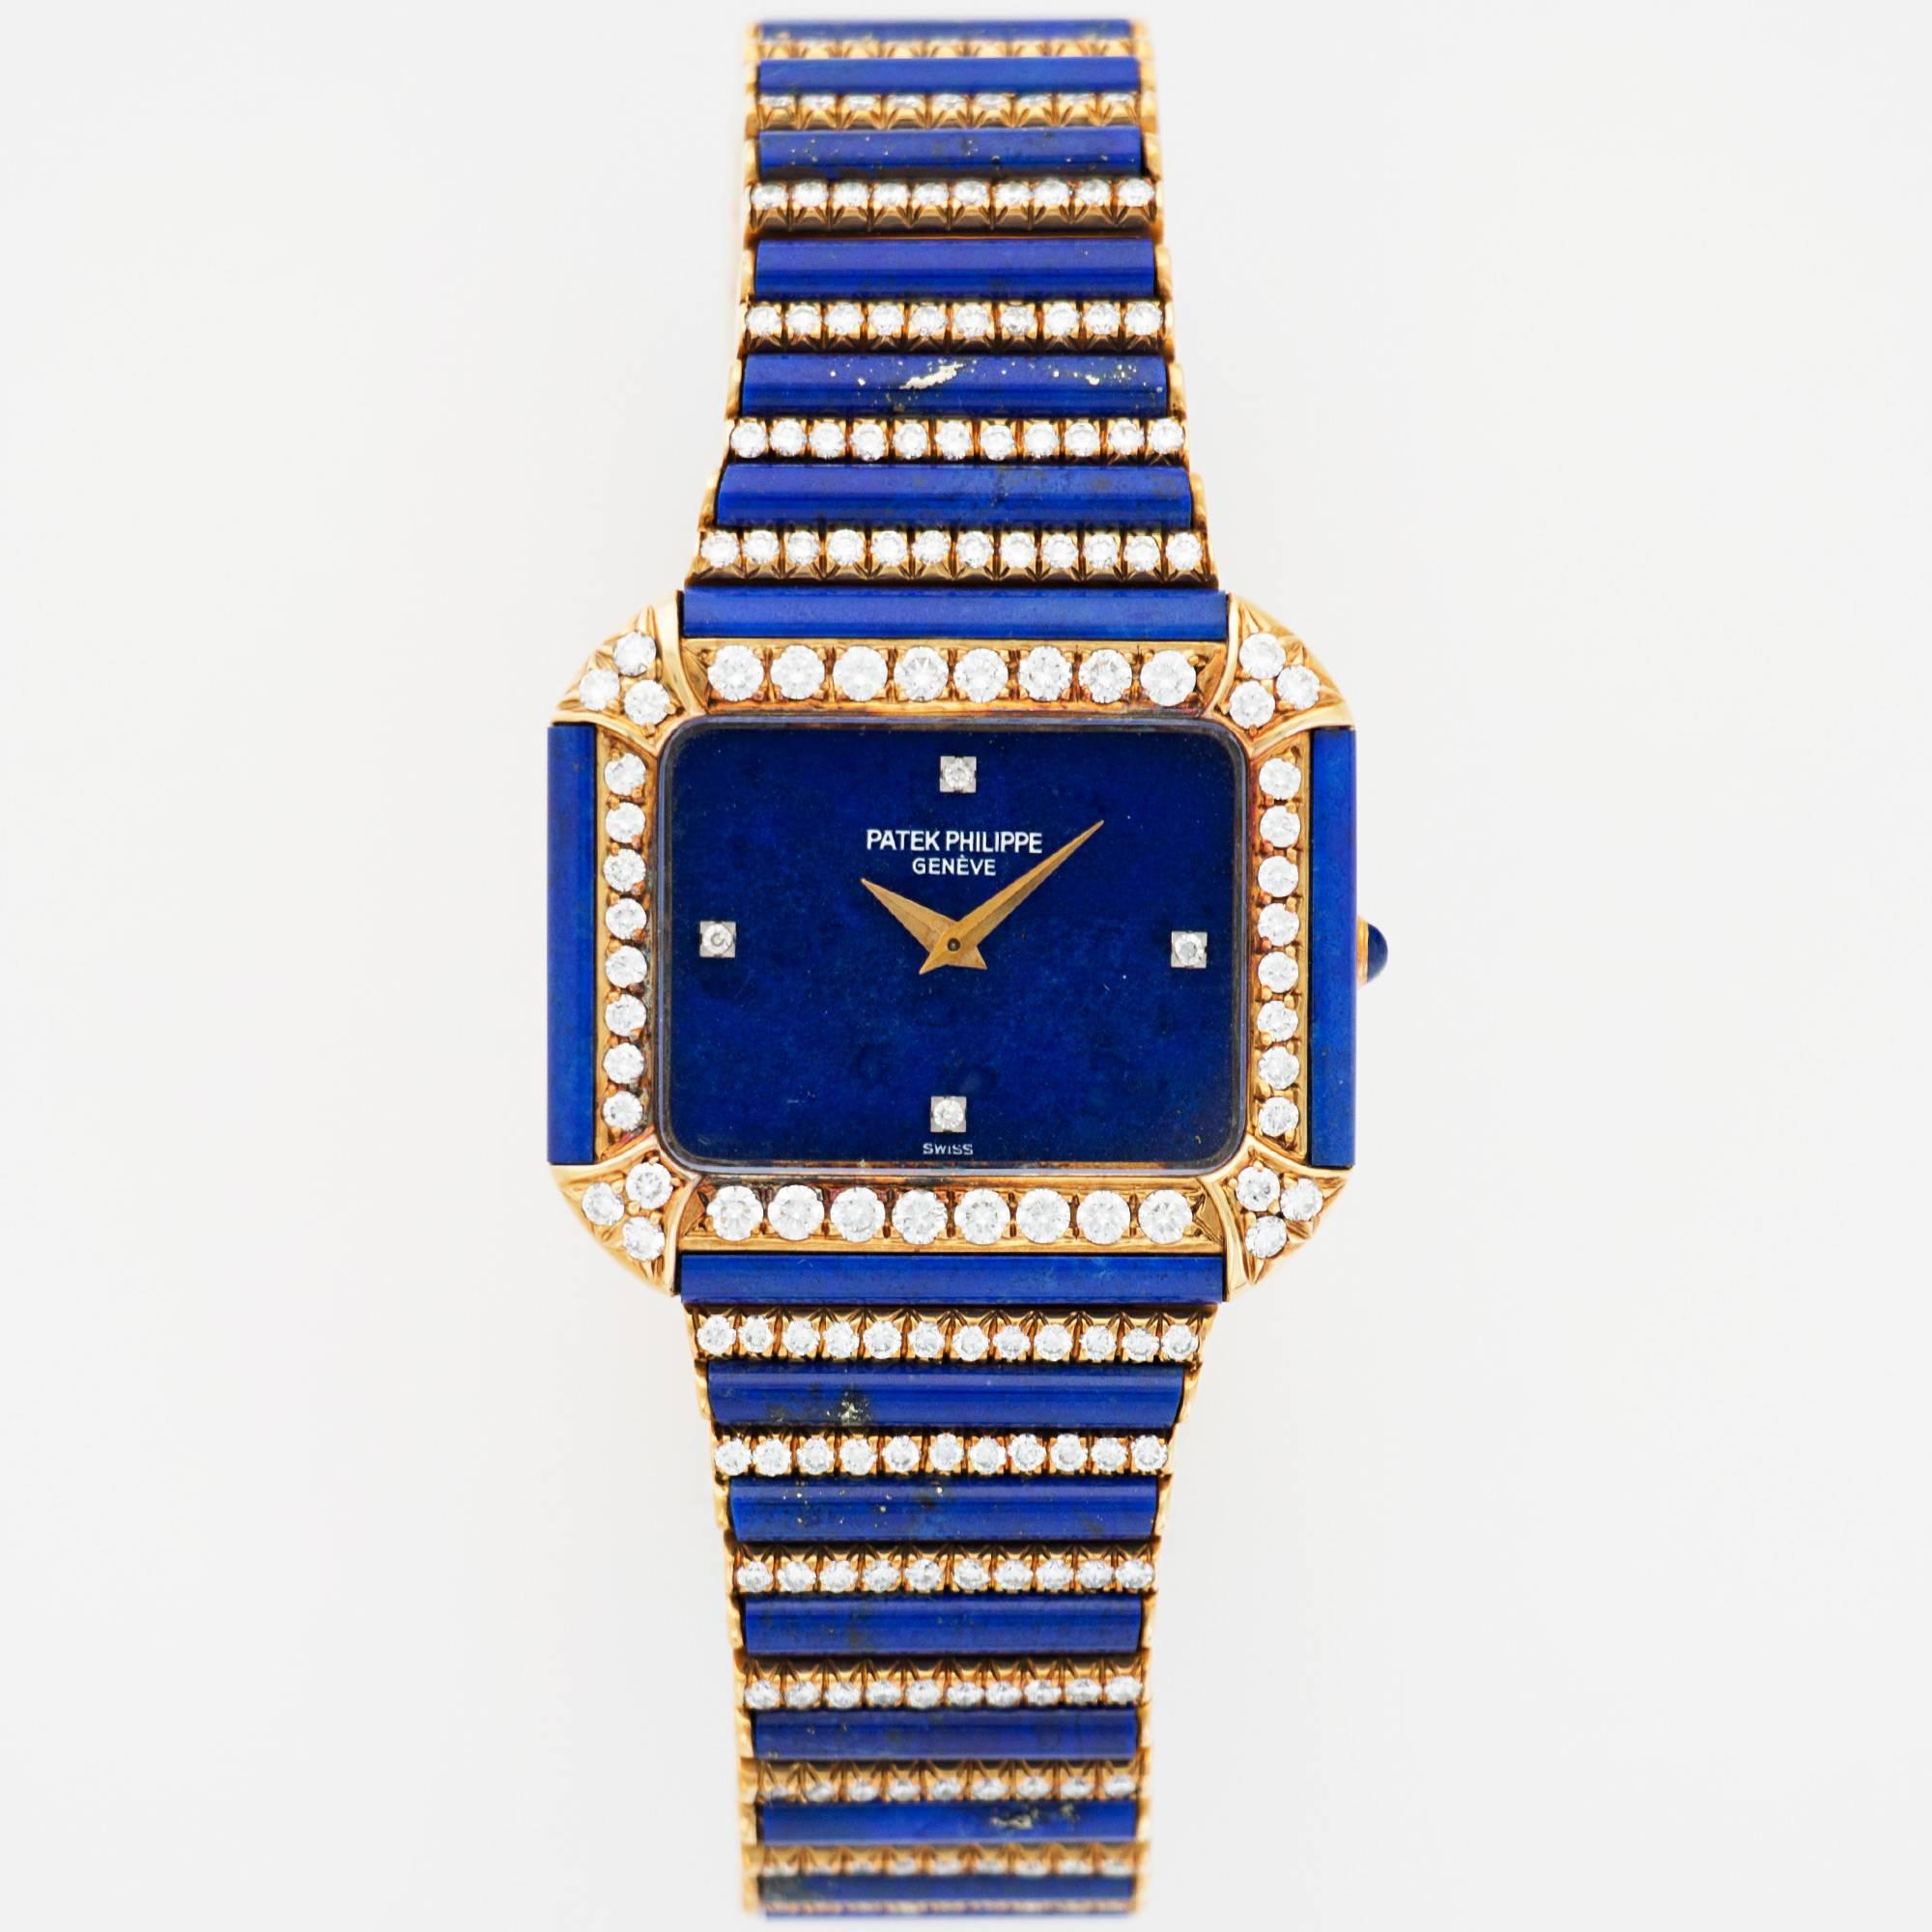 An Incredibly Rare and Unsual Lapis and Diamond Wristwatch, Ring, and Earrings Set by Patek Philippe. Accompanied by the Extract from the Patek Archives confirming the date of production in 1977 and its subsequent sale in March 1978. 

Manual